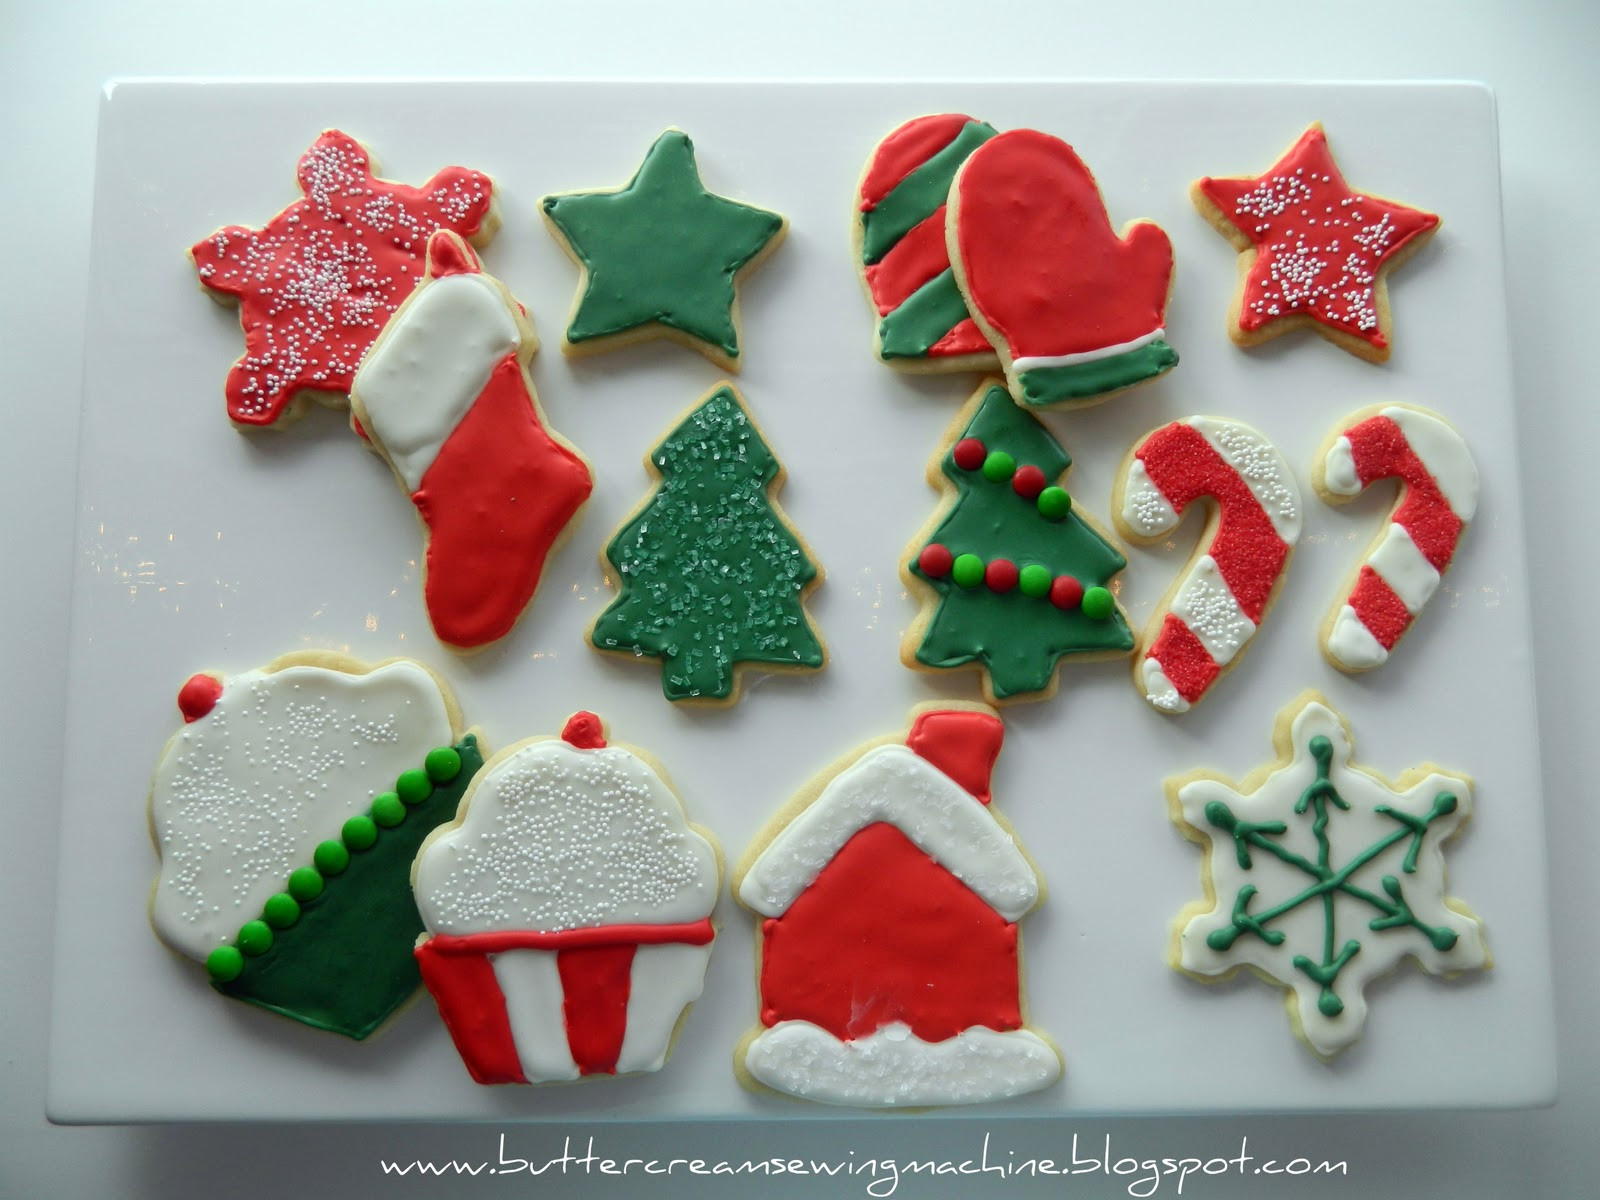 Decorating Christmas Cookies
 Buttercream and a Sewing Machine Decorating Christmas Cookies